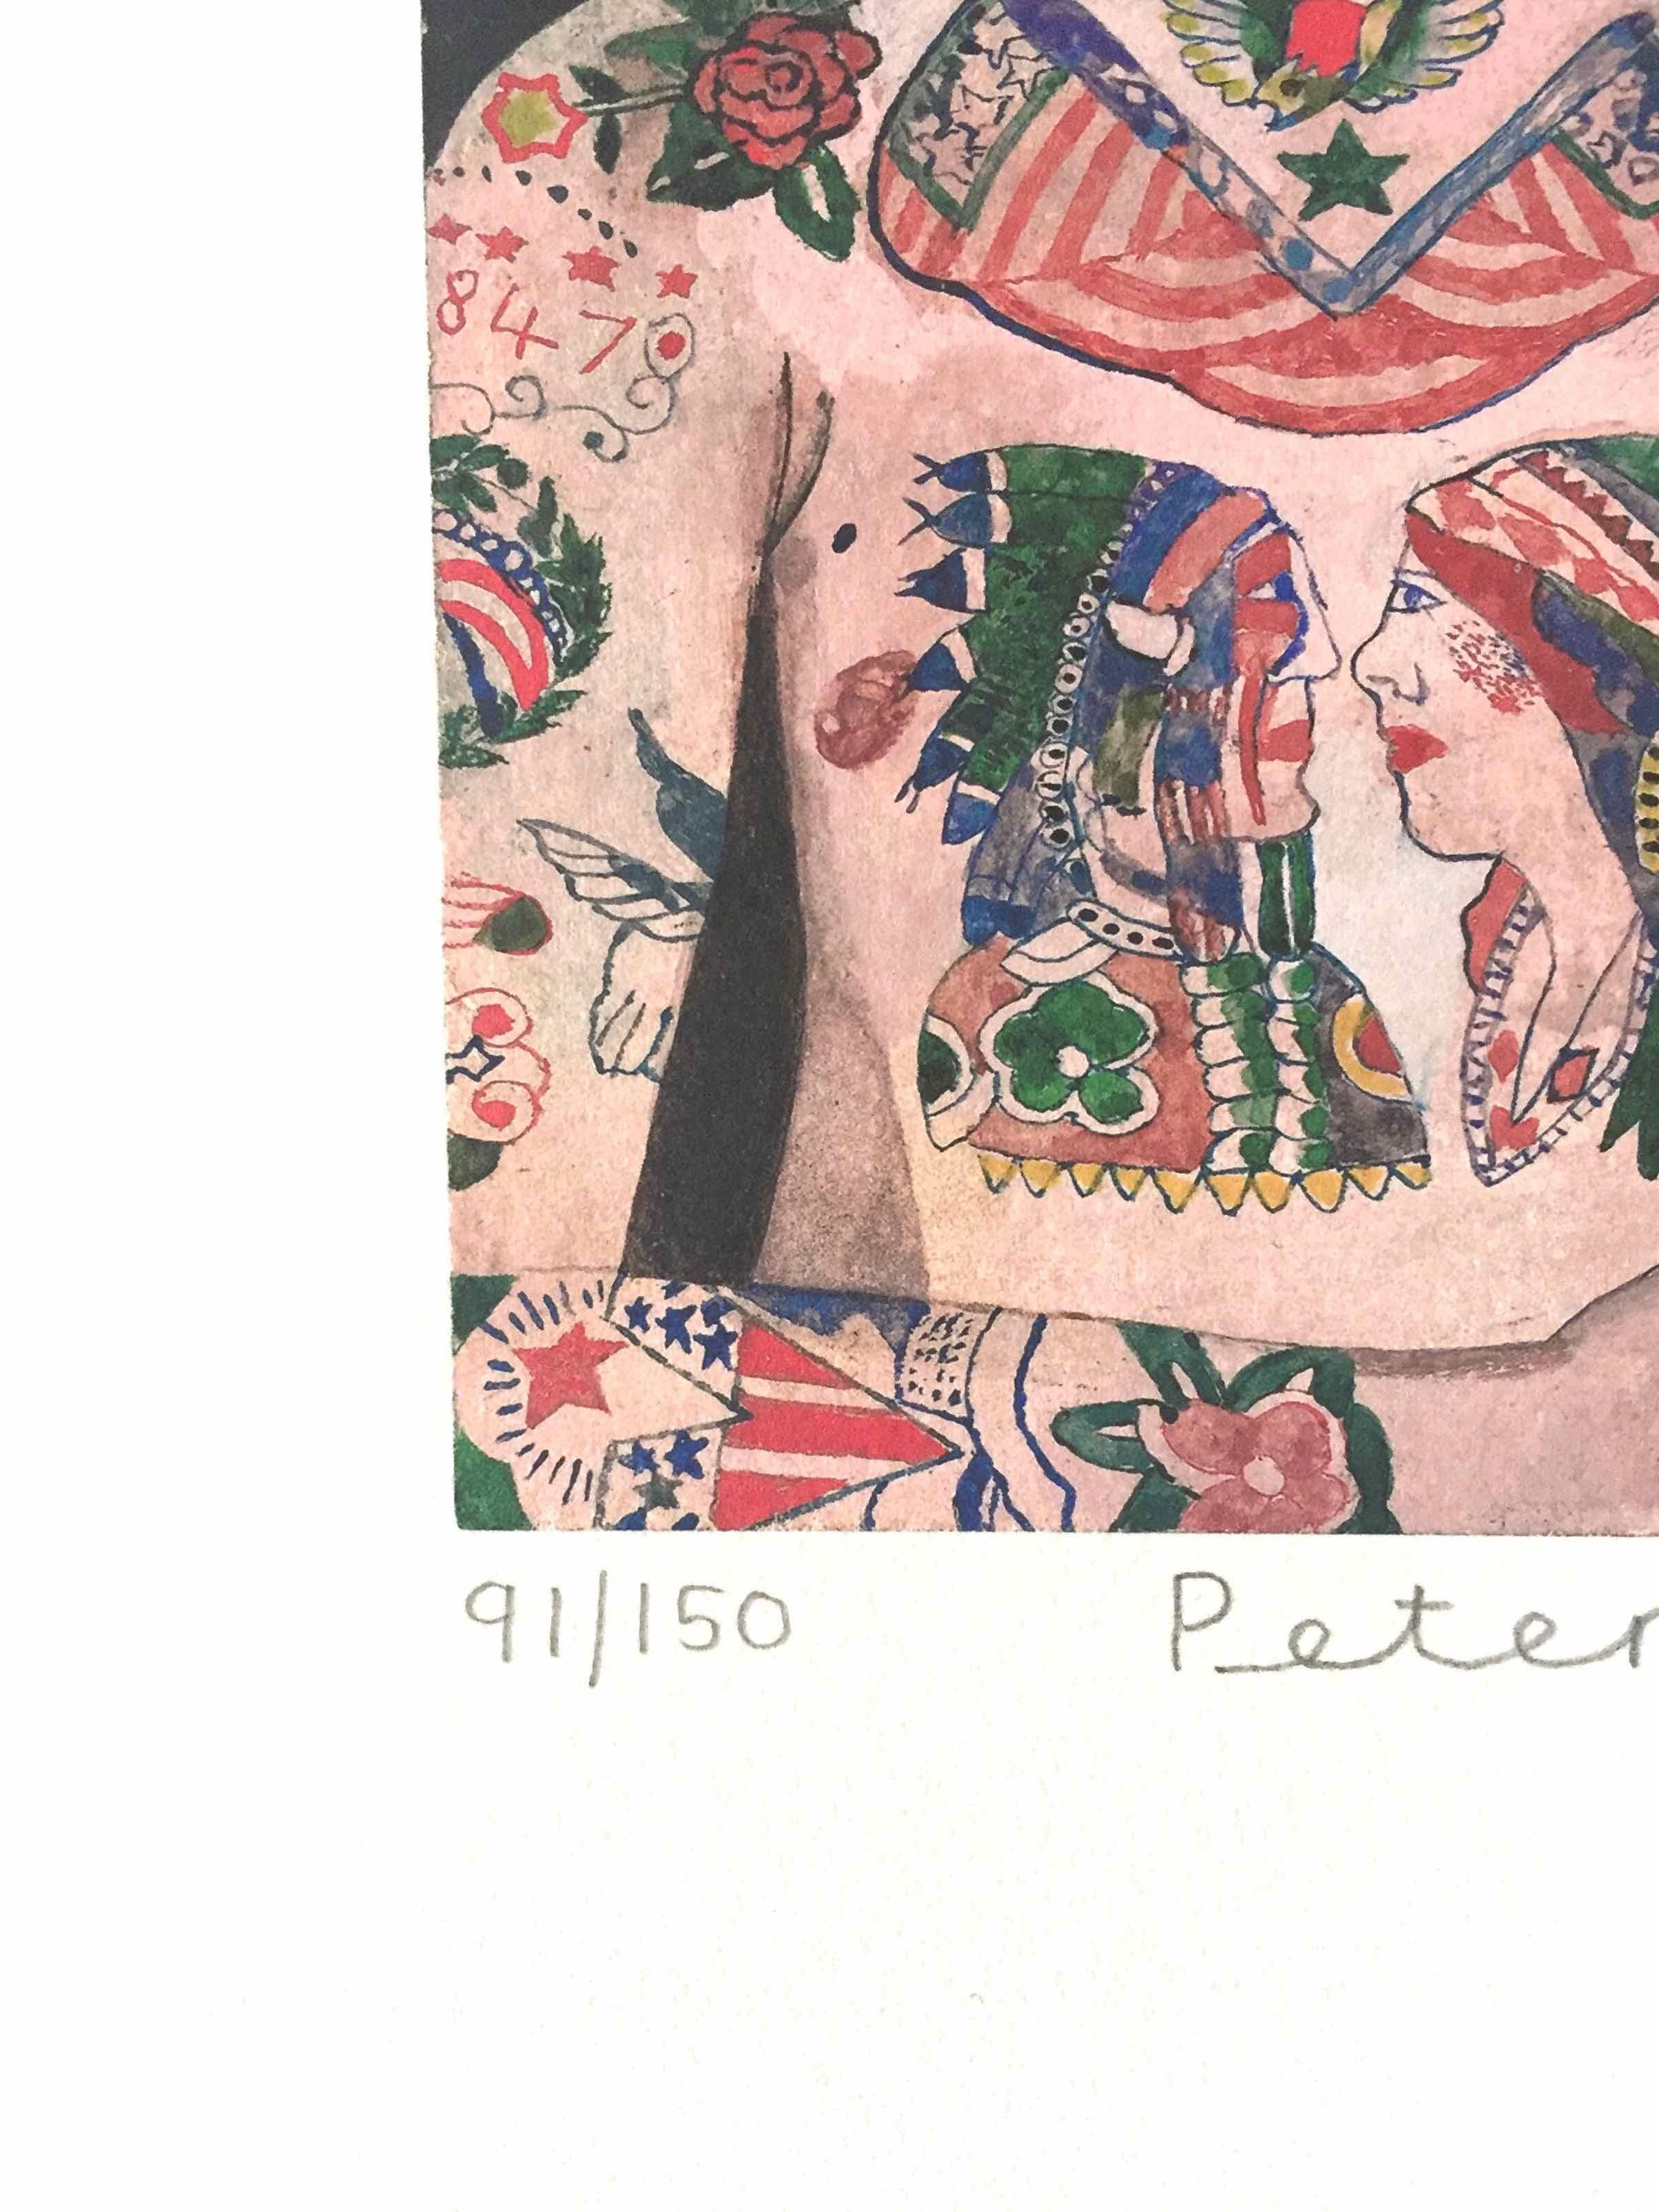 Tattooed People, Percy, 2015, Archival limited edition inkjet print on photo rag satin paper, Edition 150, 11 × 8 3/10 in, 28 × 21 cm, signed and numbered by Sir Peter Blake (unframed)

Widely regarded as the godfather of British Pop art and the